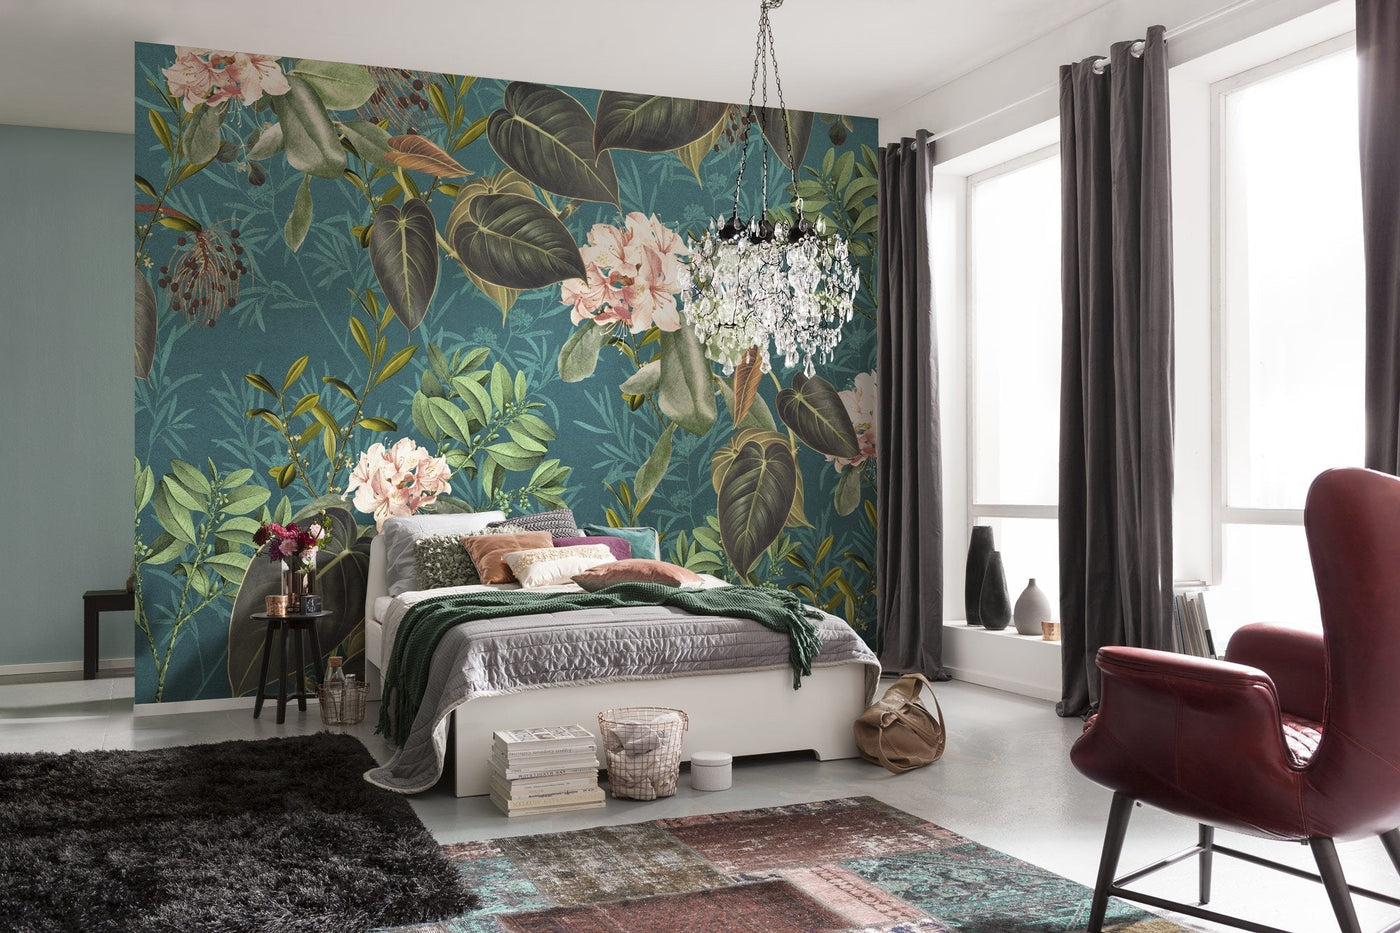 Emerald Leaf Mural Wallpaper-Wall Decor-ECO MURALS, FLORAL WALLPAPERS, LEAF WALLPAPER, MURALS, MURALS / WALLPAPERS, NON-WOVEN WALLPAPER-Forest Homes-Nature inspired decor-Nature decor